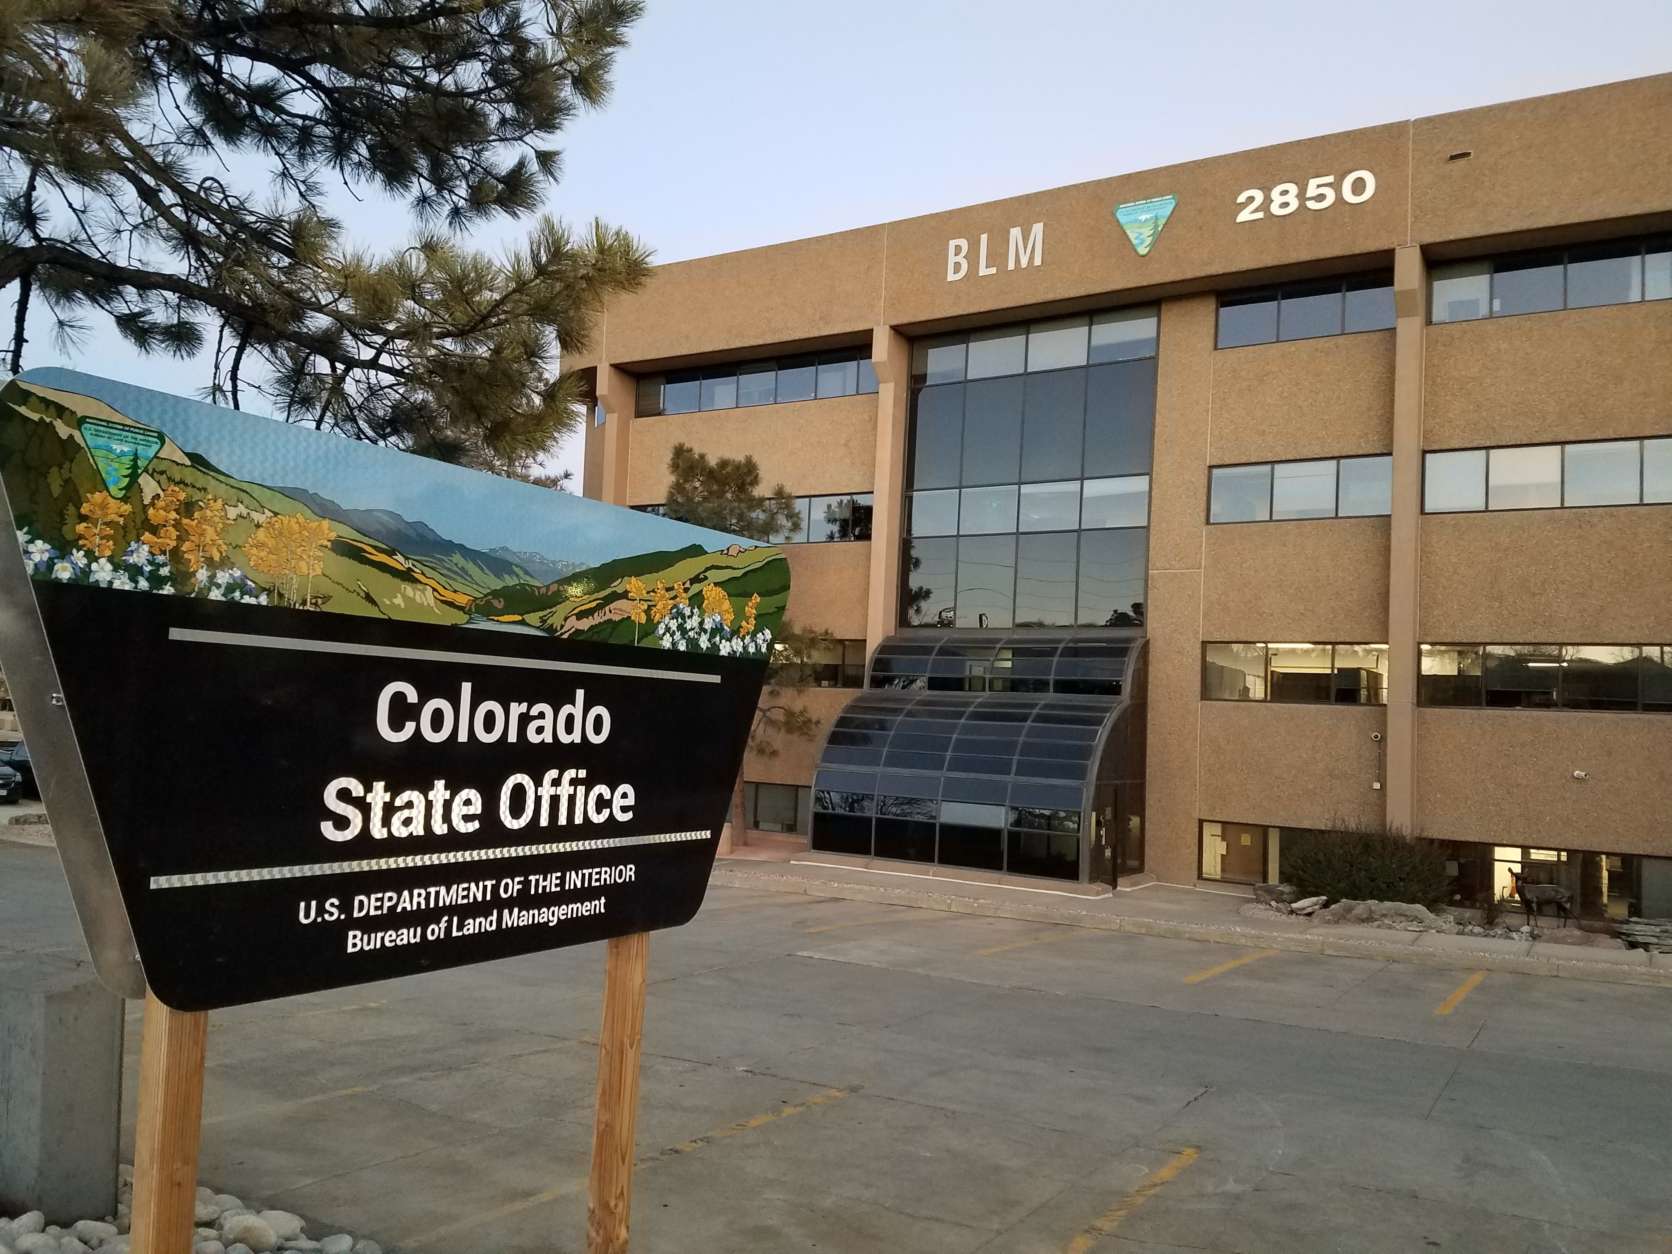 Interior Details Plans To Relocate Blm Employees To Colorado